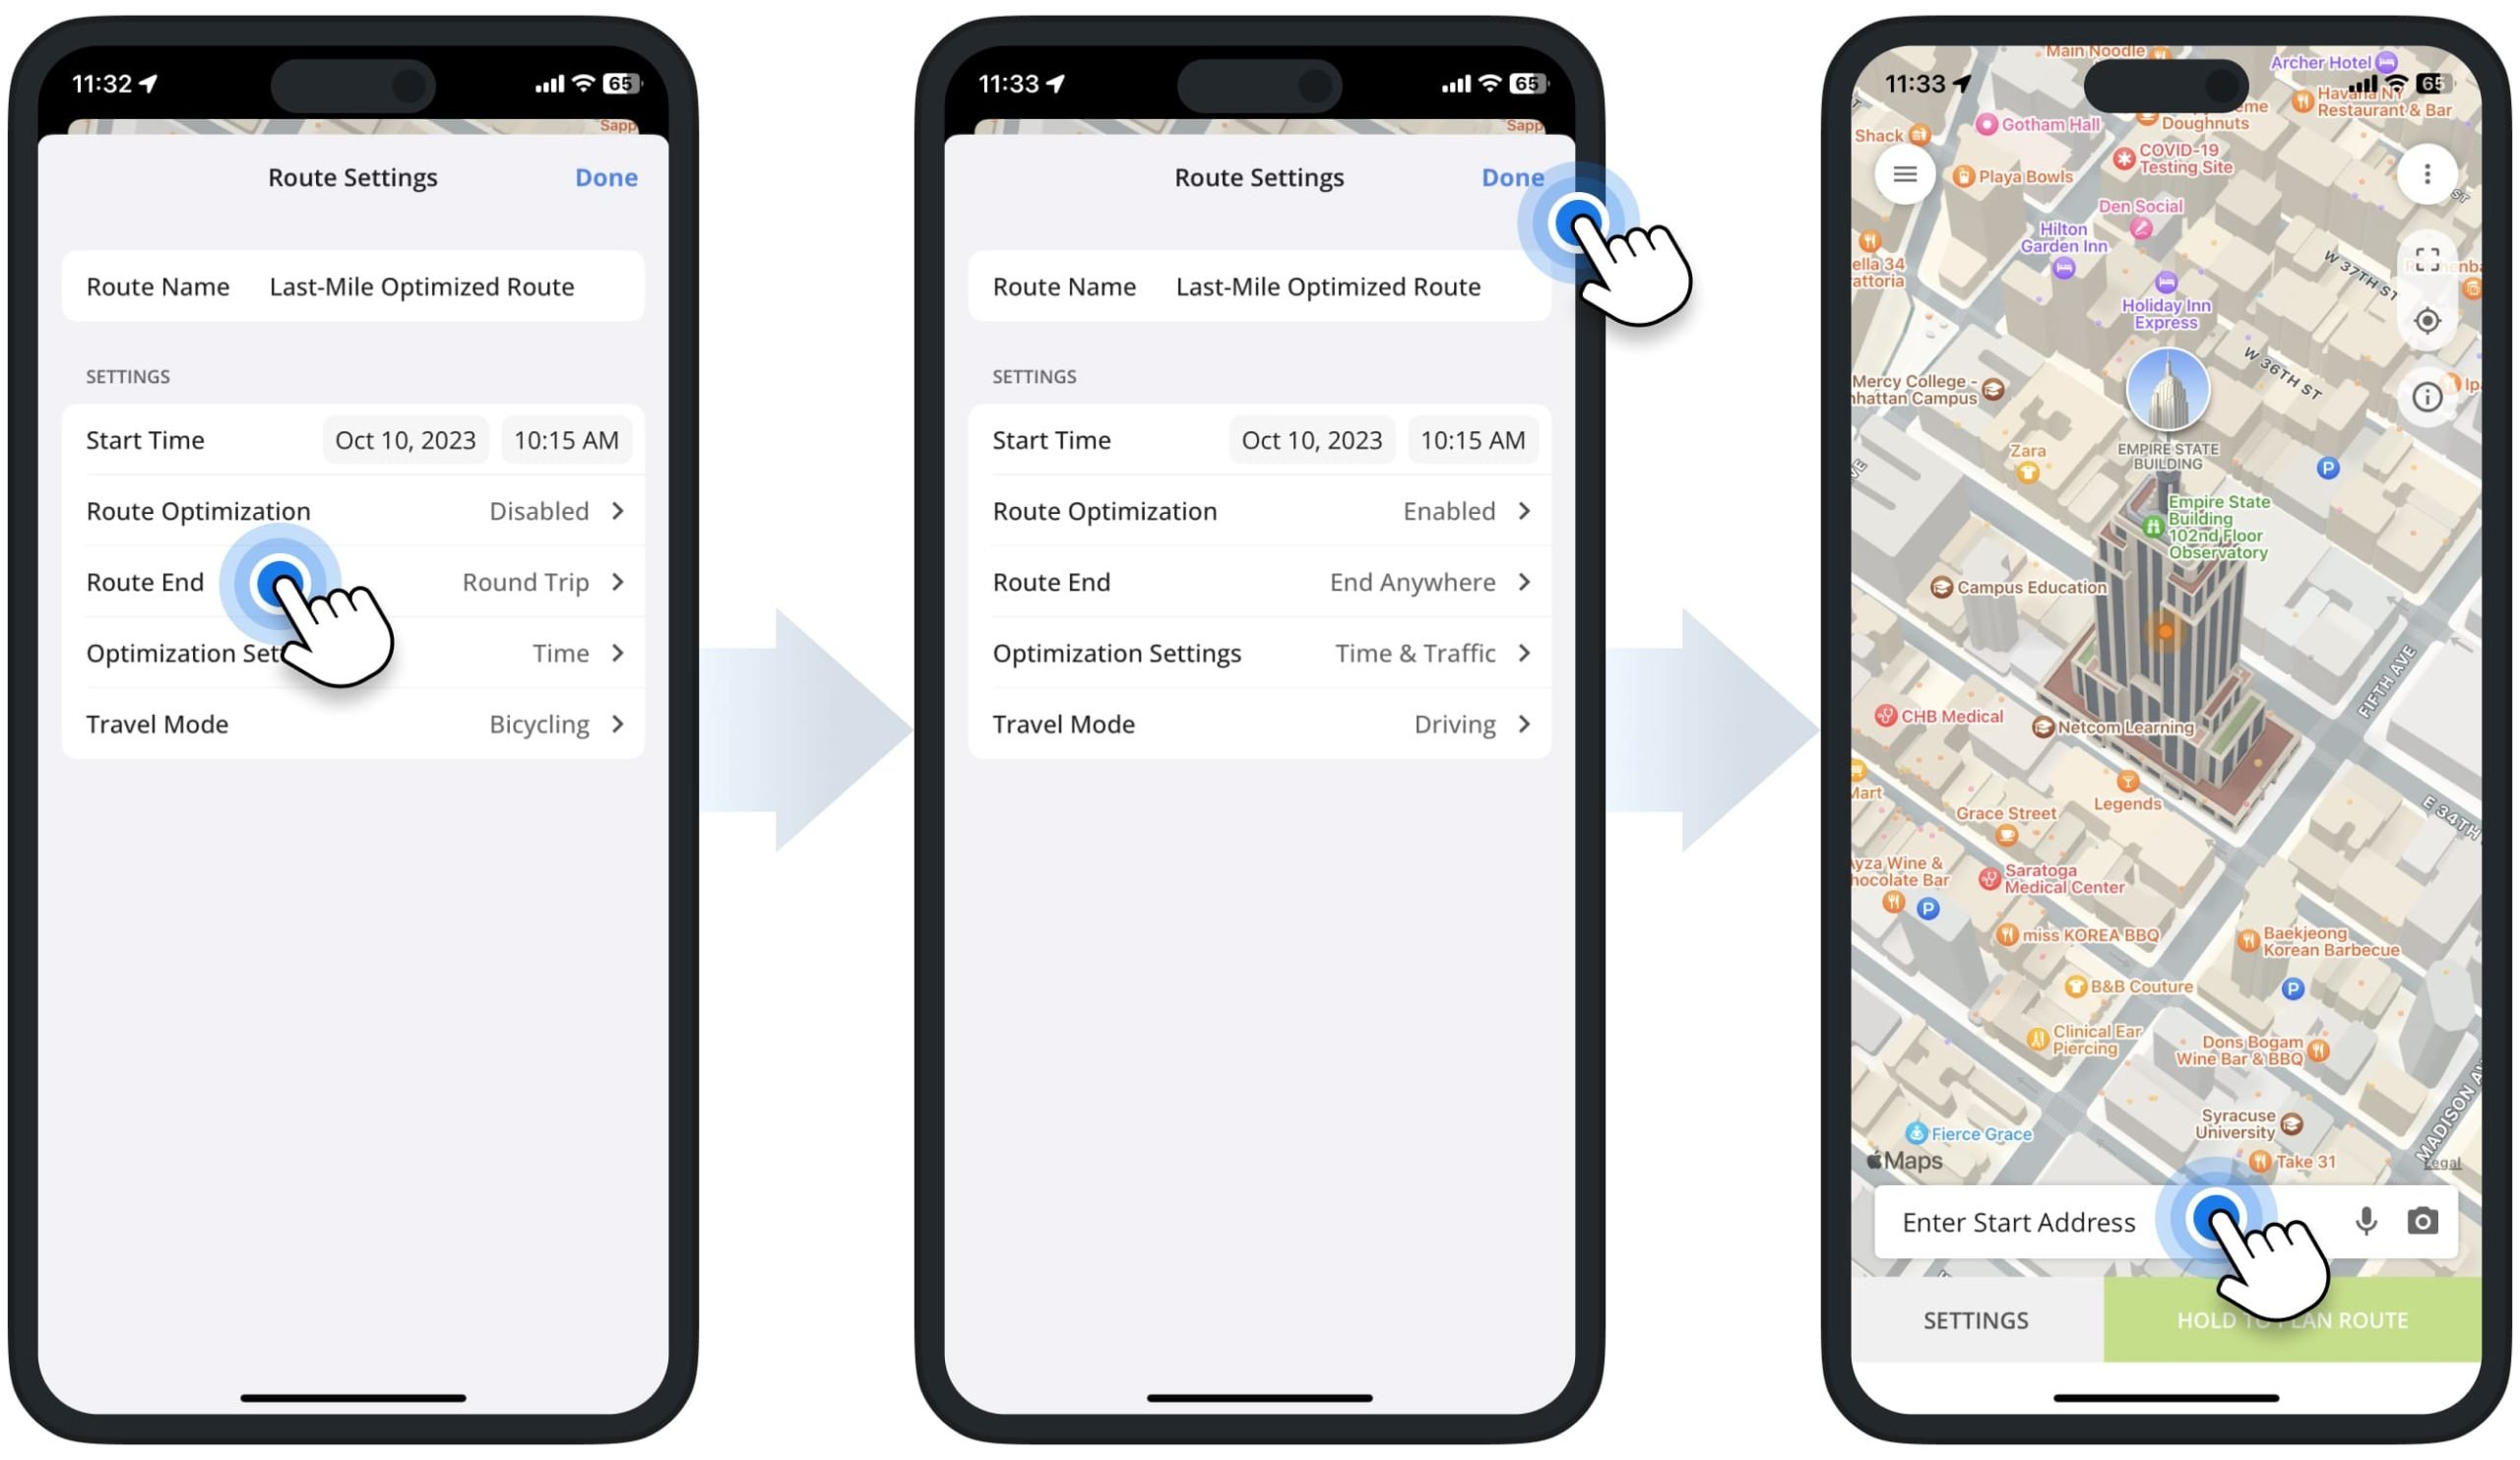 Specifying route optimization settings, travel mode, and other routing settings on Route4Me's Multi-Stop iPhone Route Planner app.